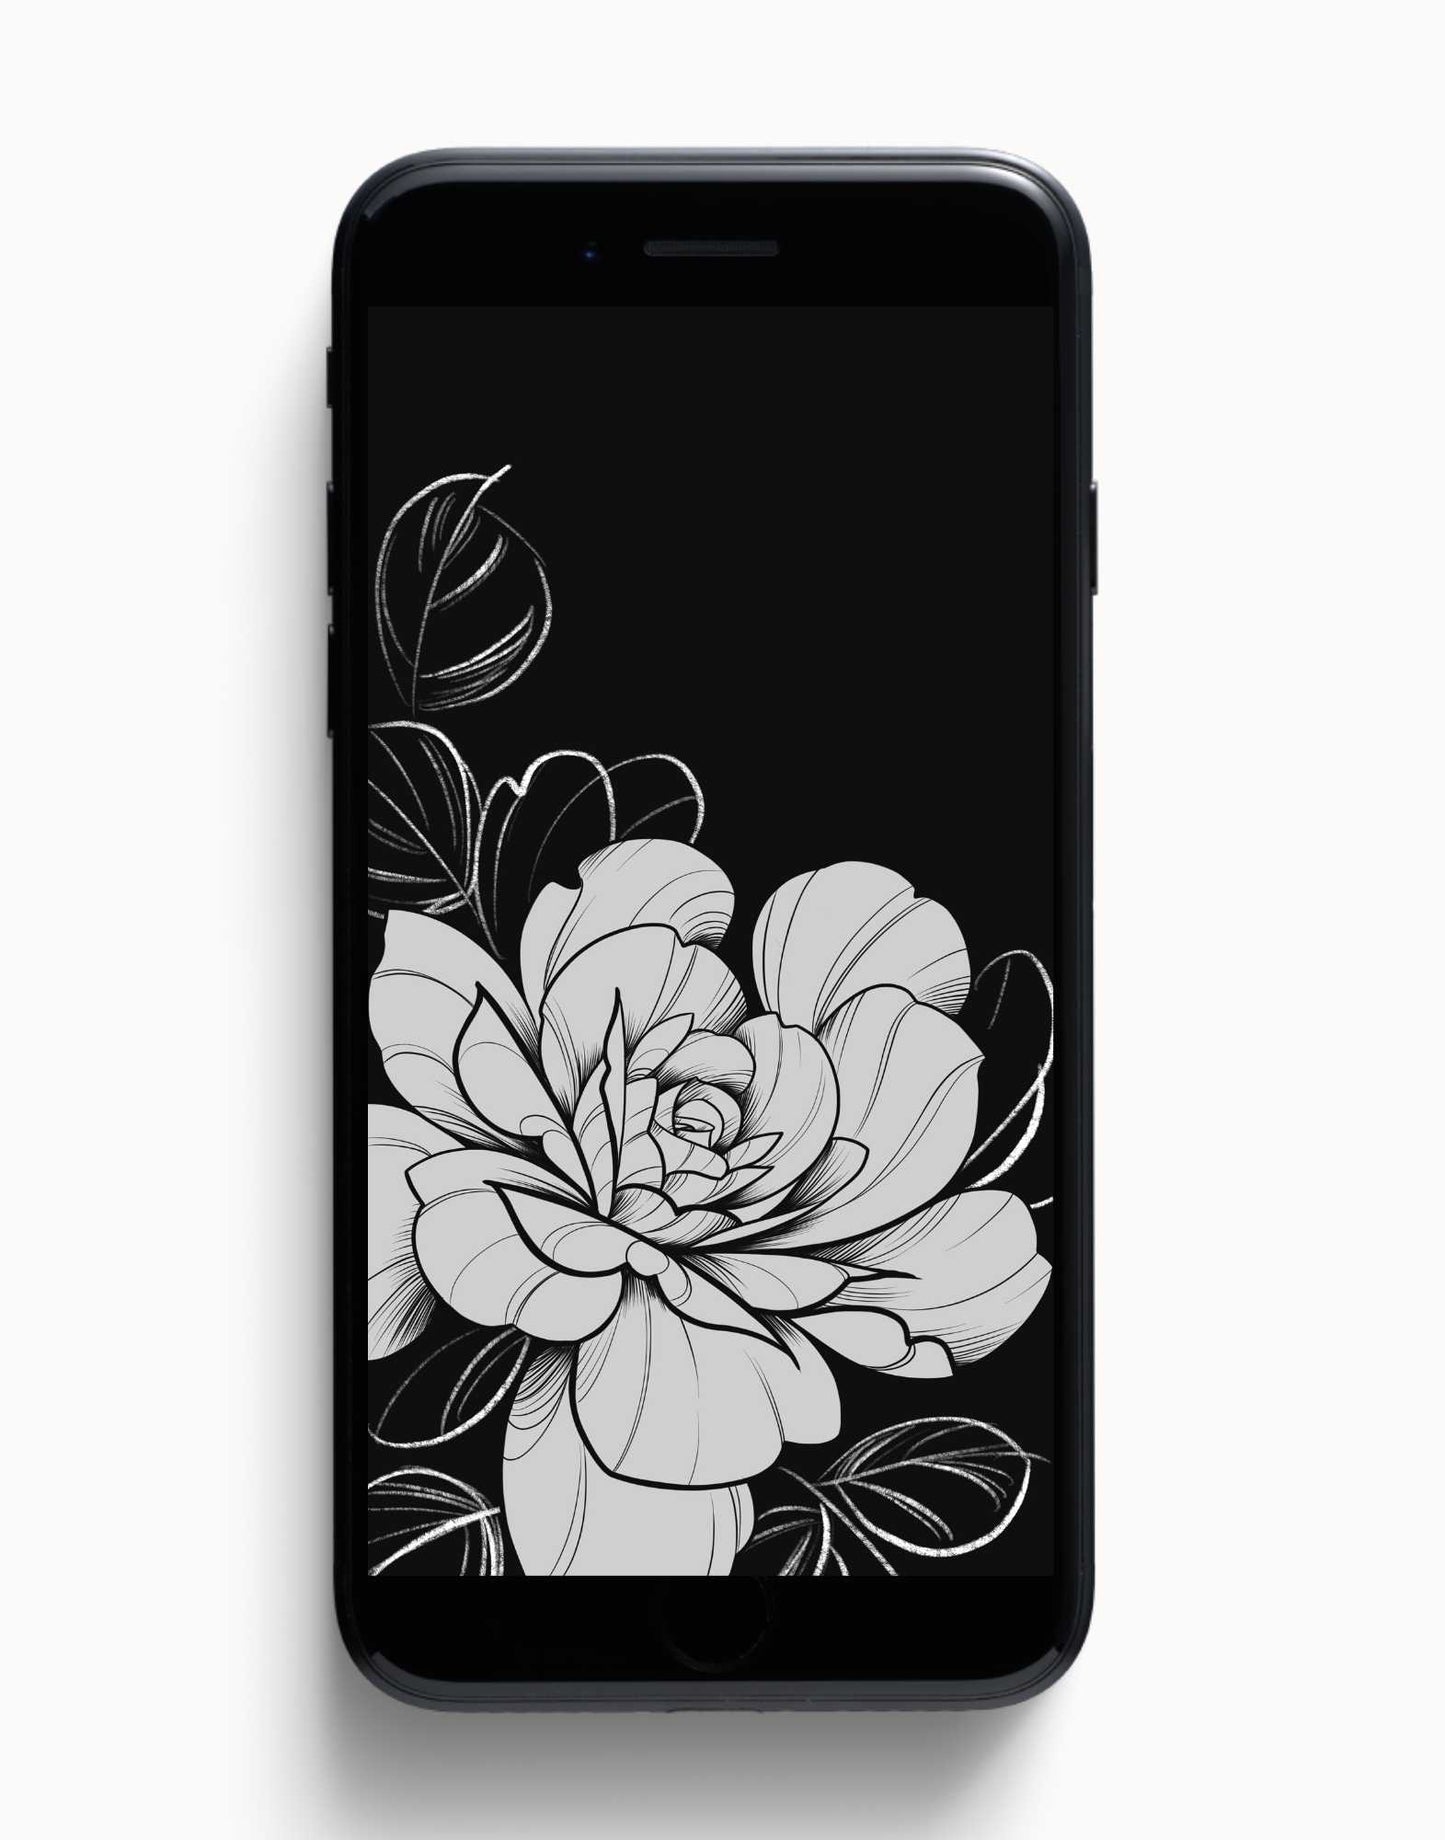 Rose design for phone wallpaper, white ink on black background, with fine lines and shading. Designed by Lu Loram Martin, Toronto, Canada.